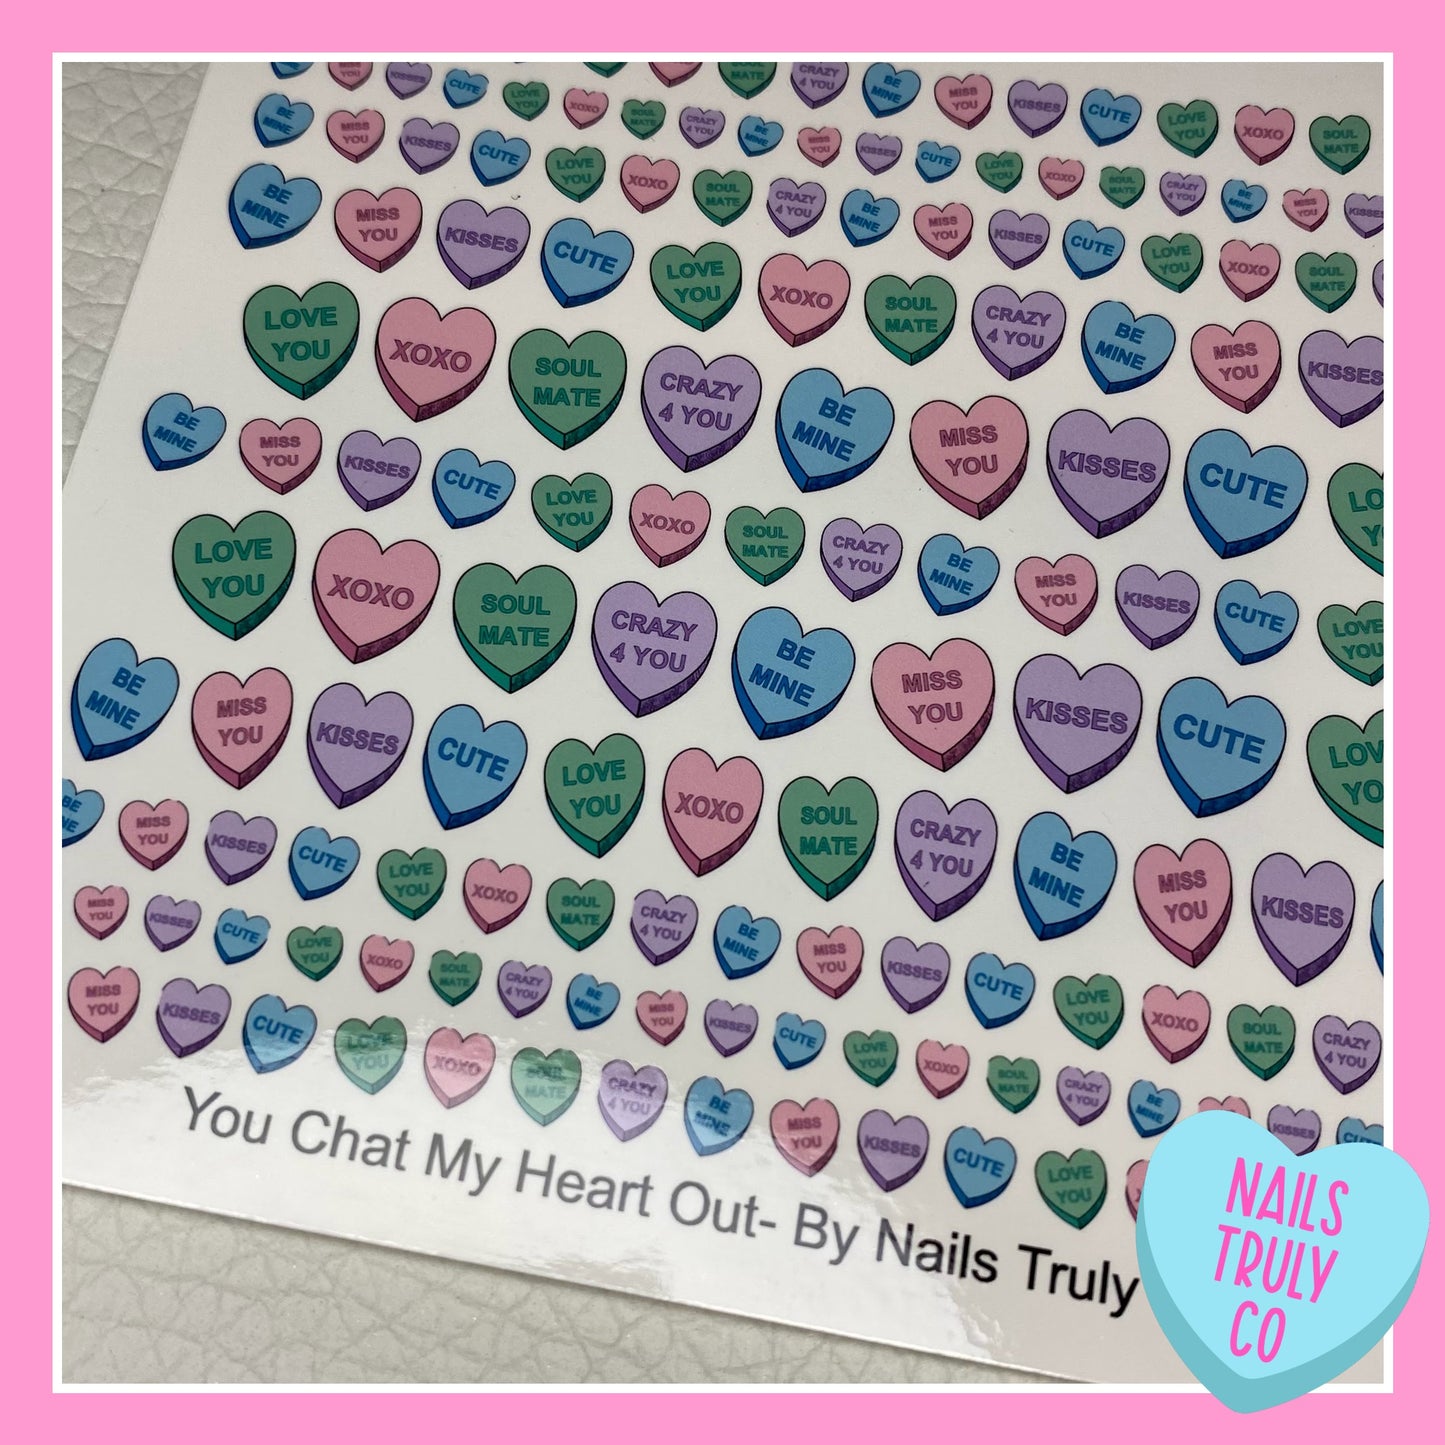 Conversation Hearts- You Chat My Heart Out